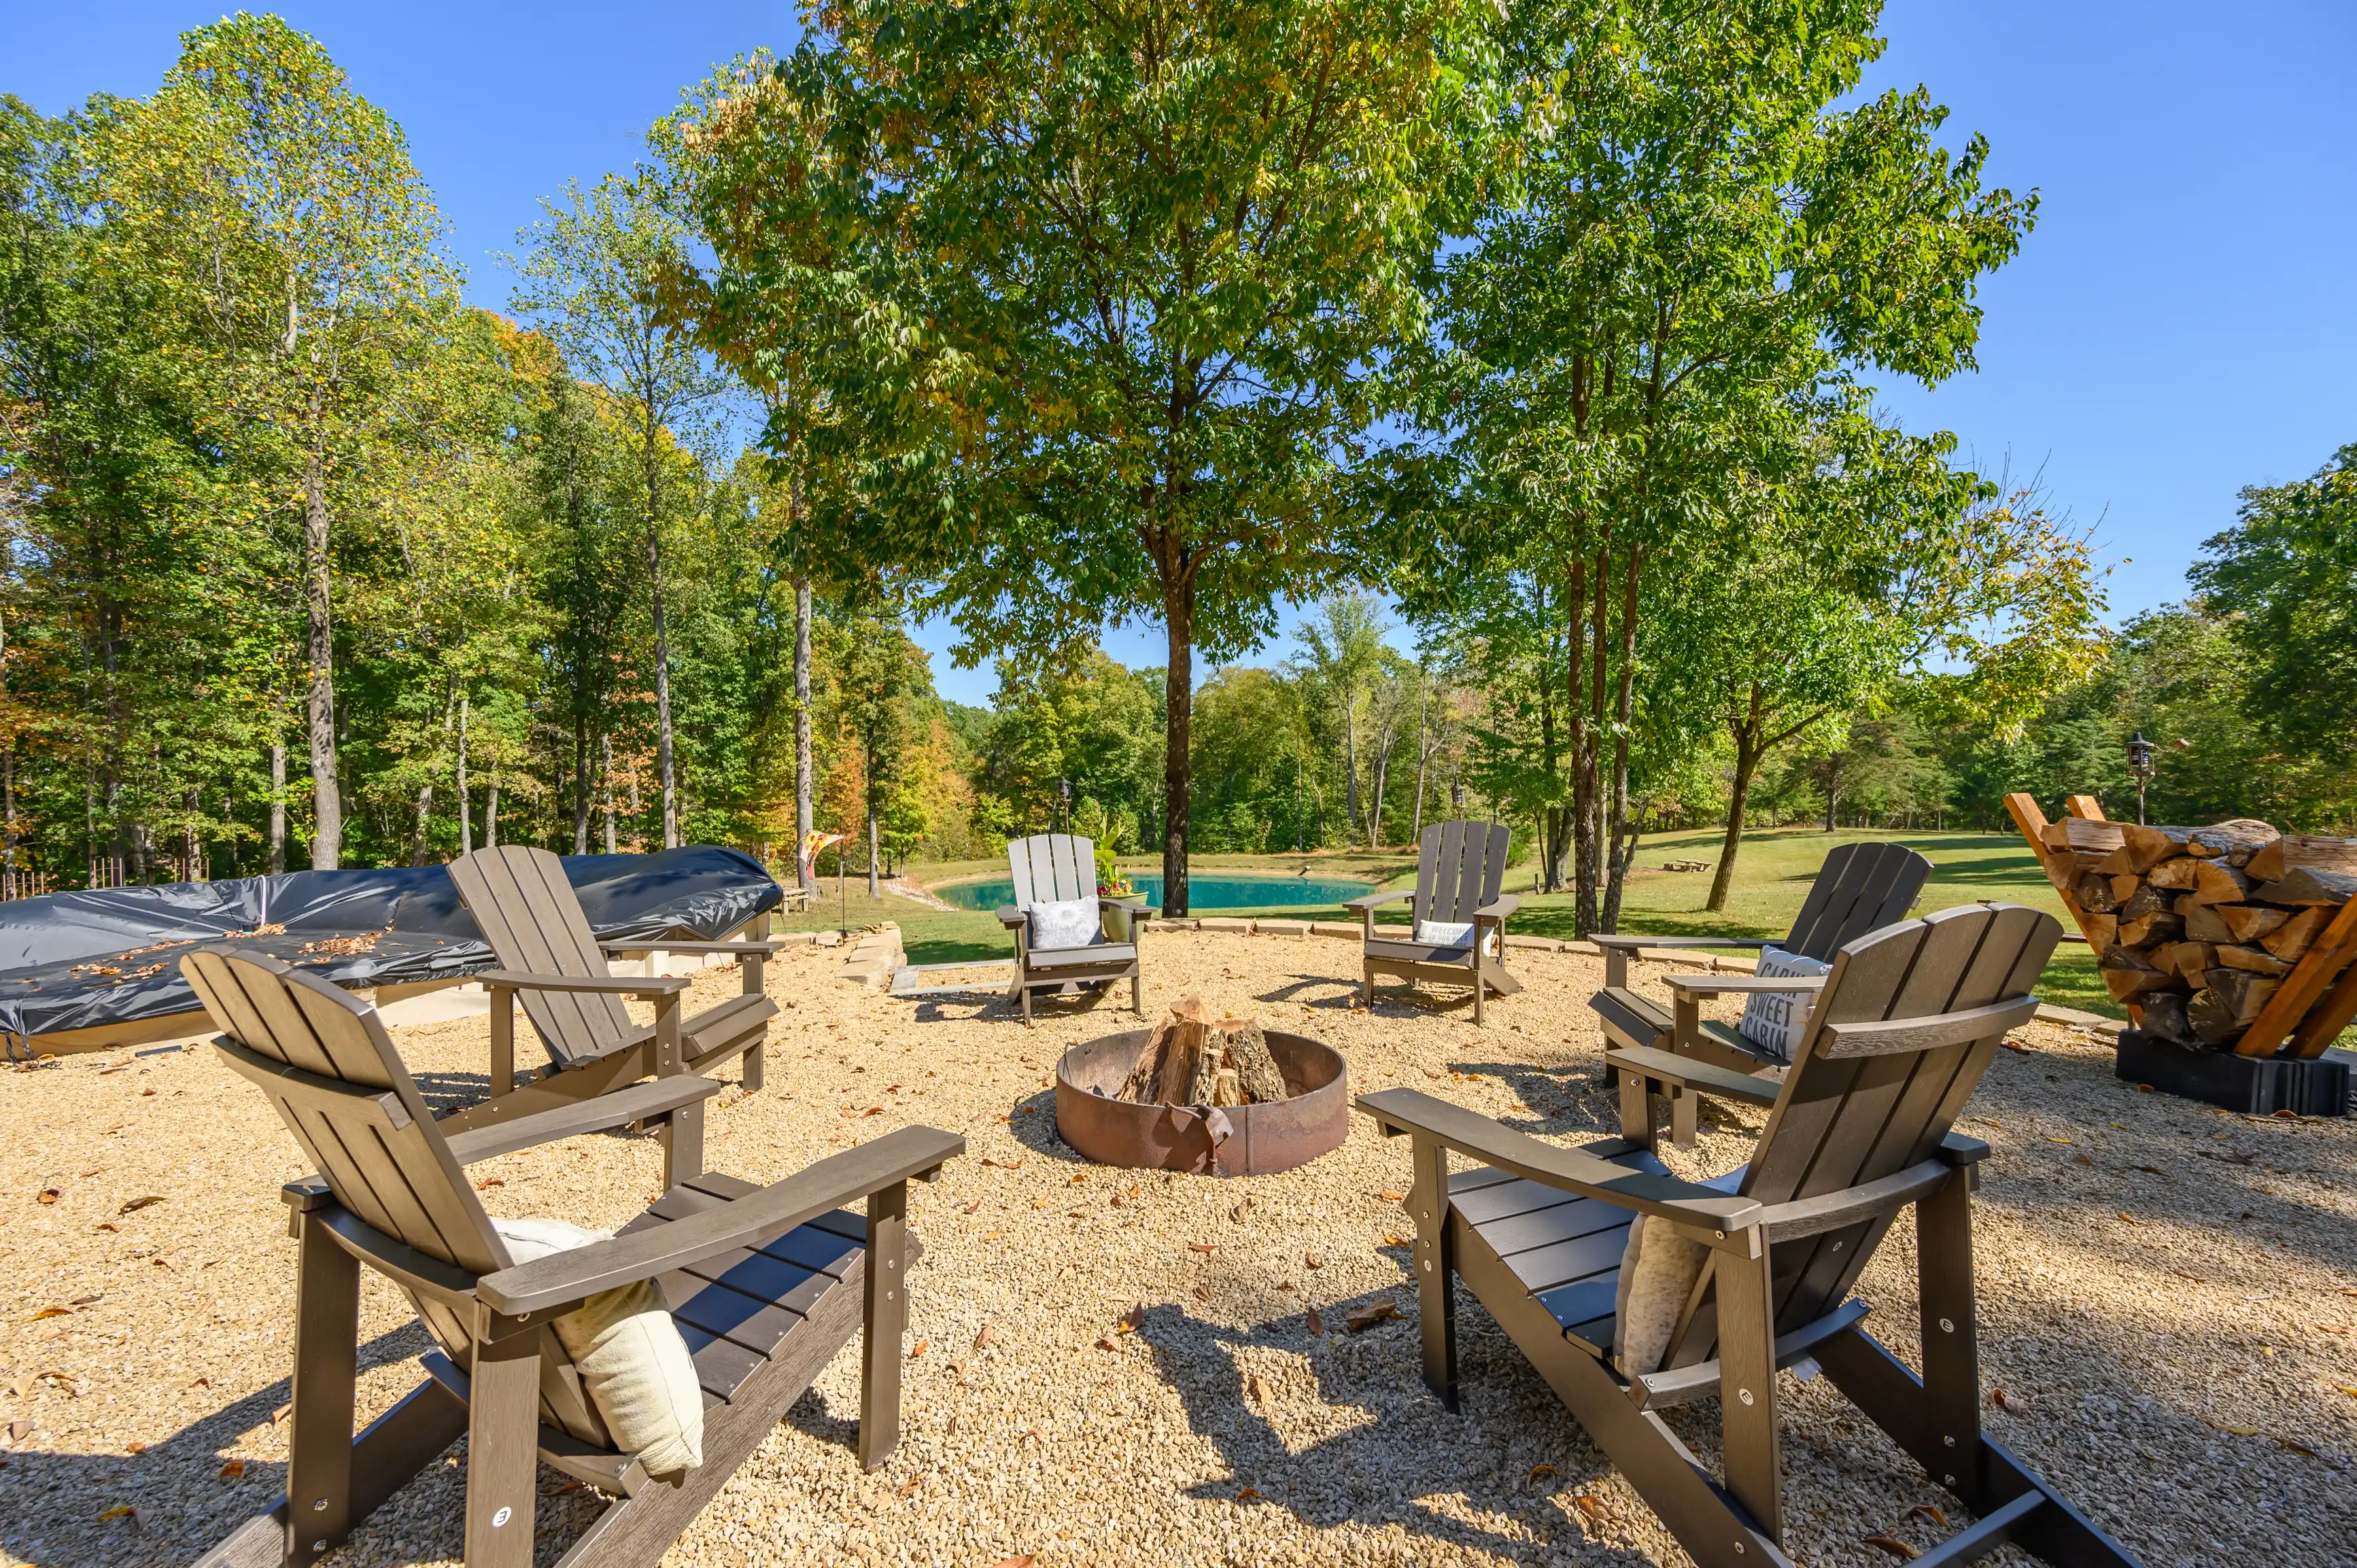 Outdoor fire pit area with Adirondack chairs surrounded by trees on a bed of gravel with a pile of firewood to the side.